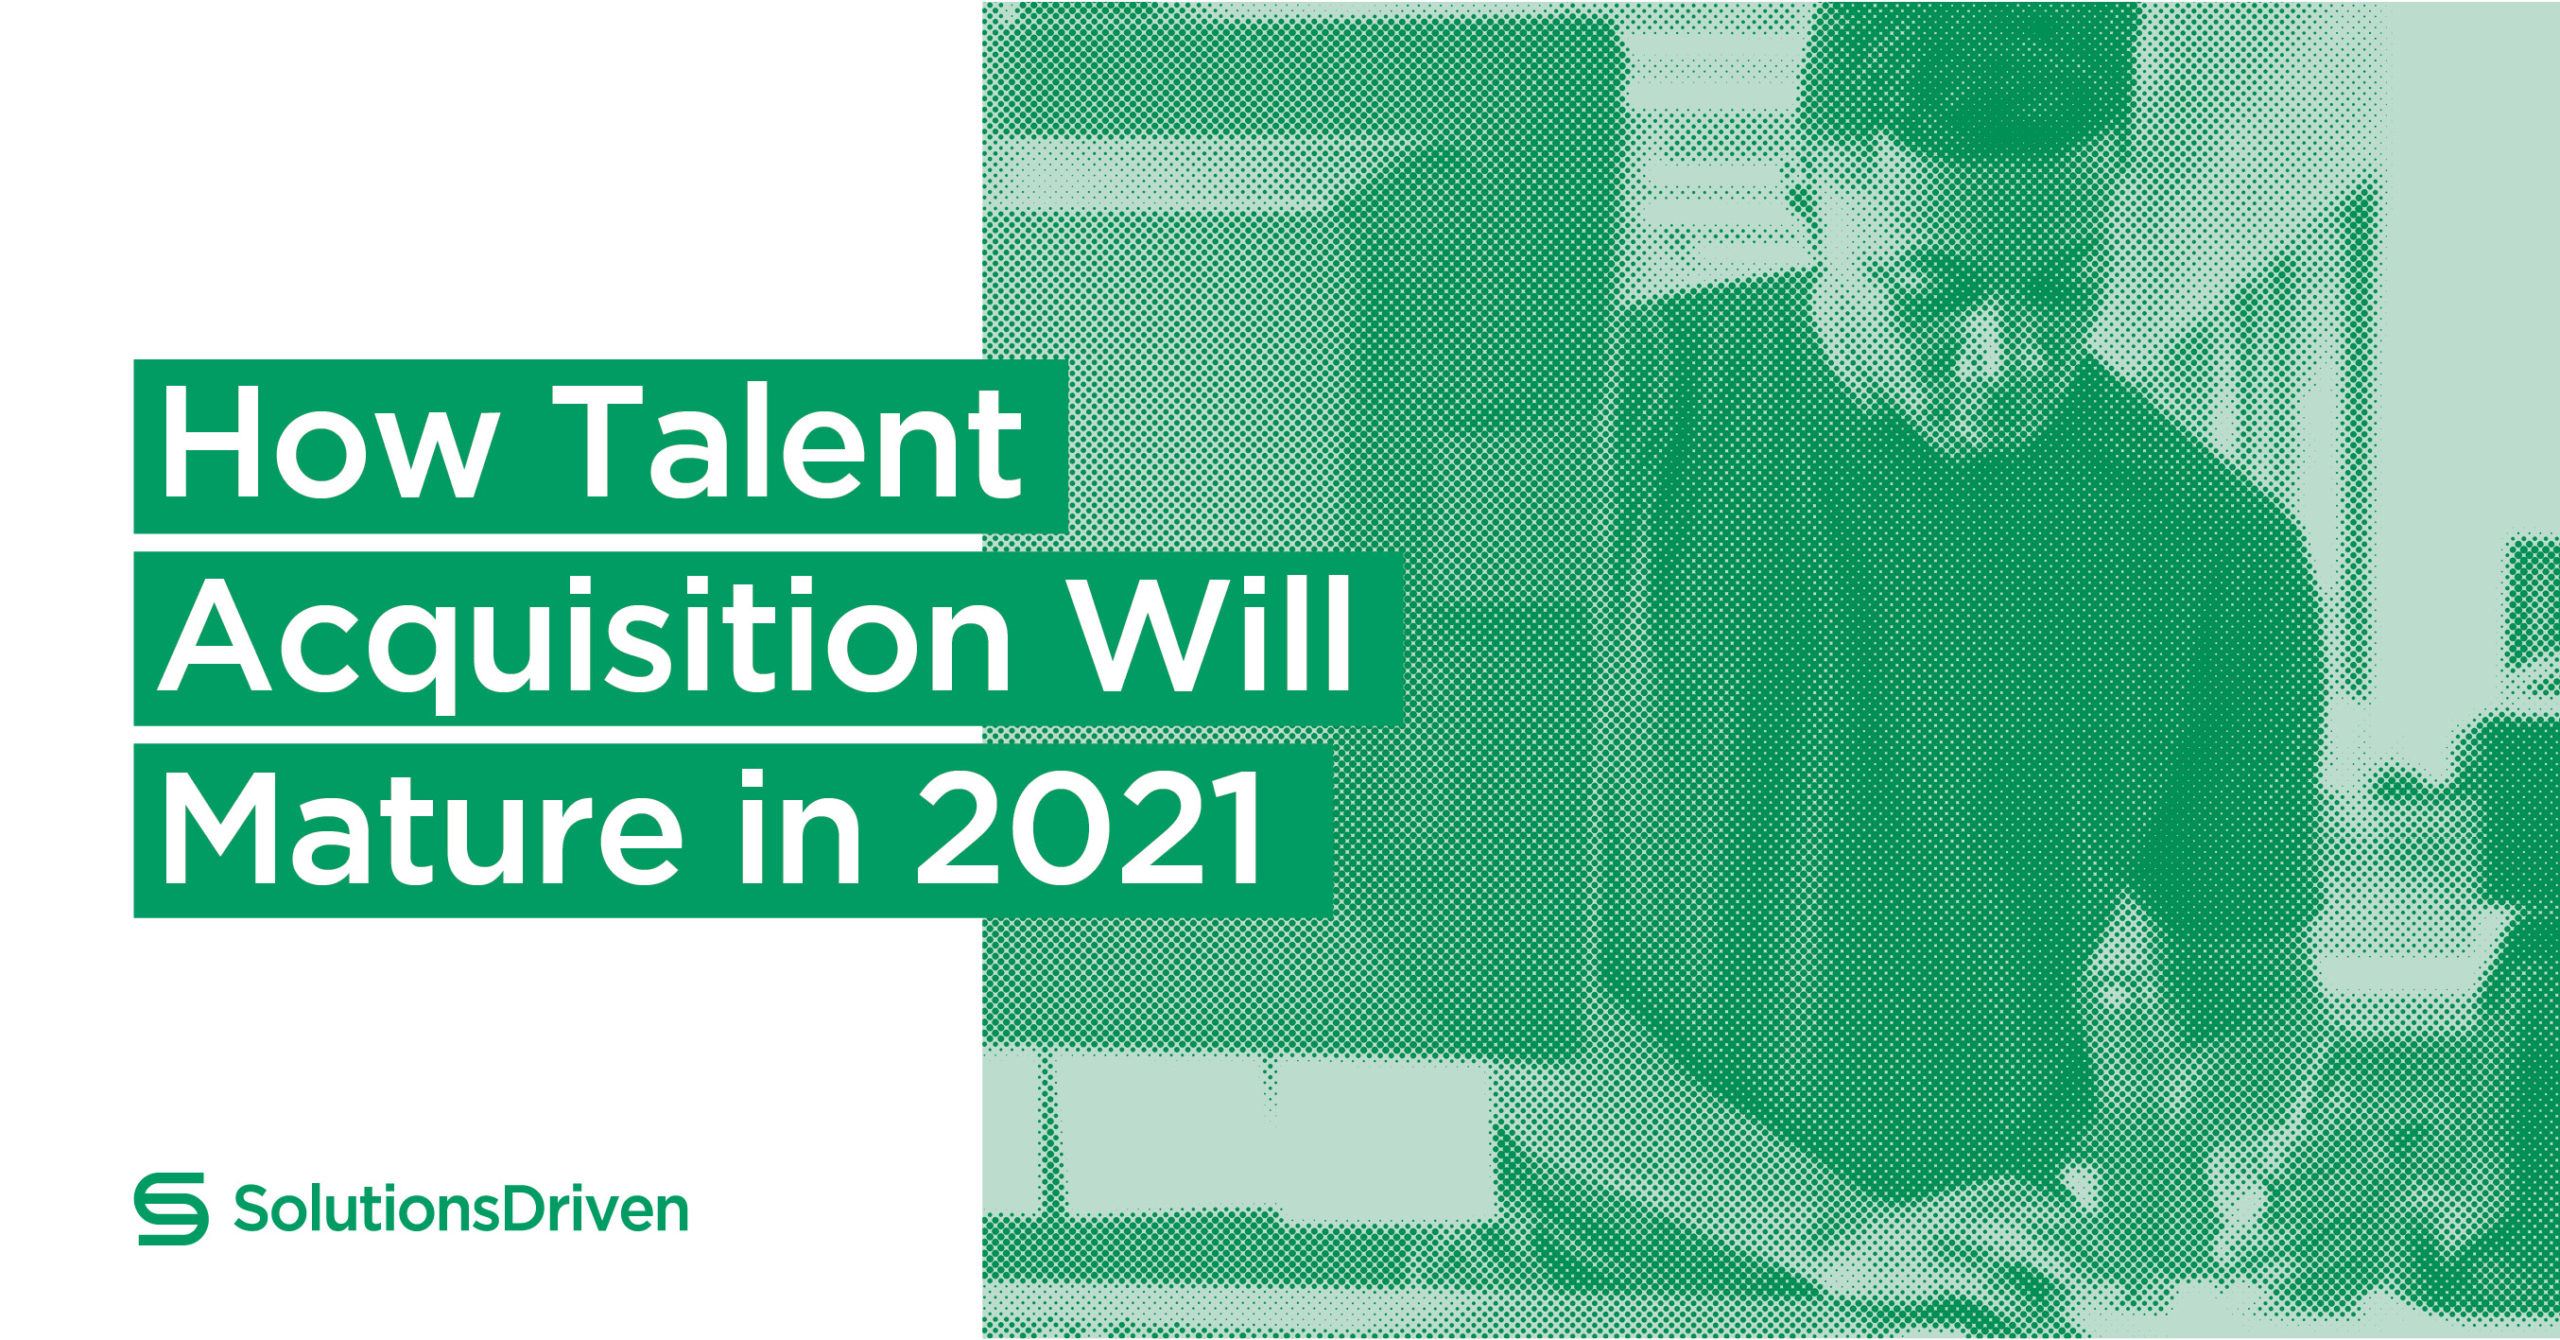 How The Talent Acquisition Model Will Mature Solutions Driven 7748